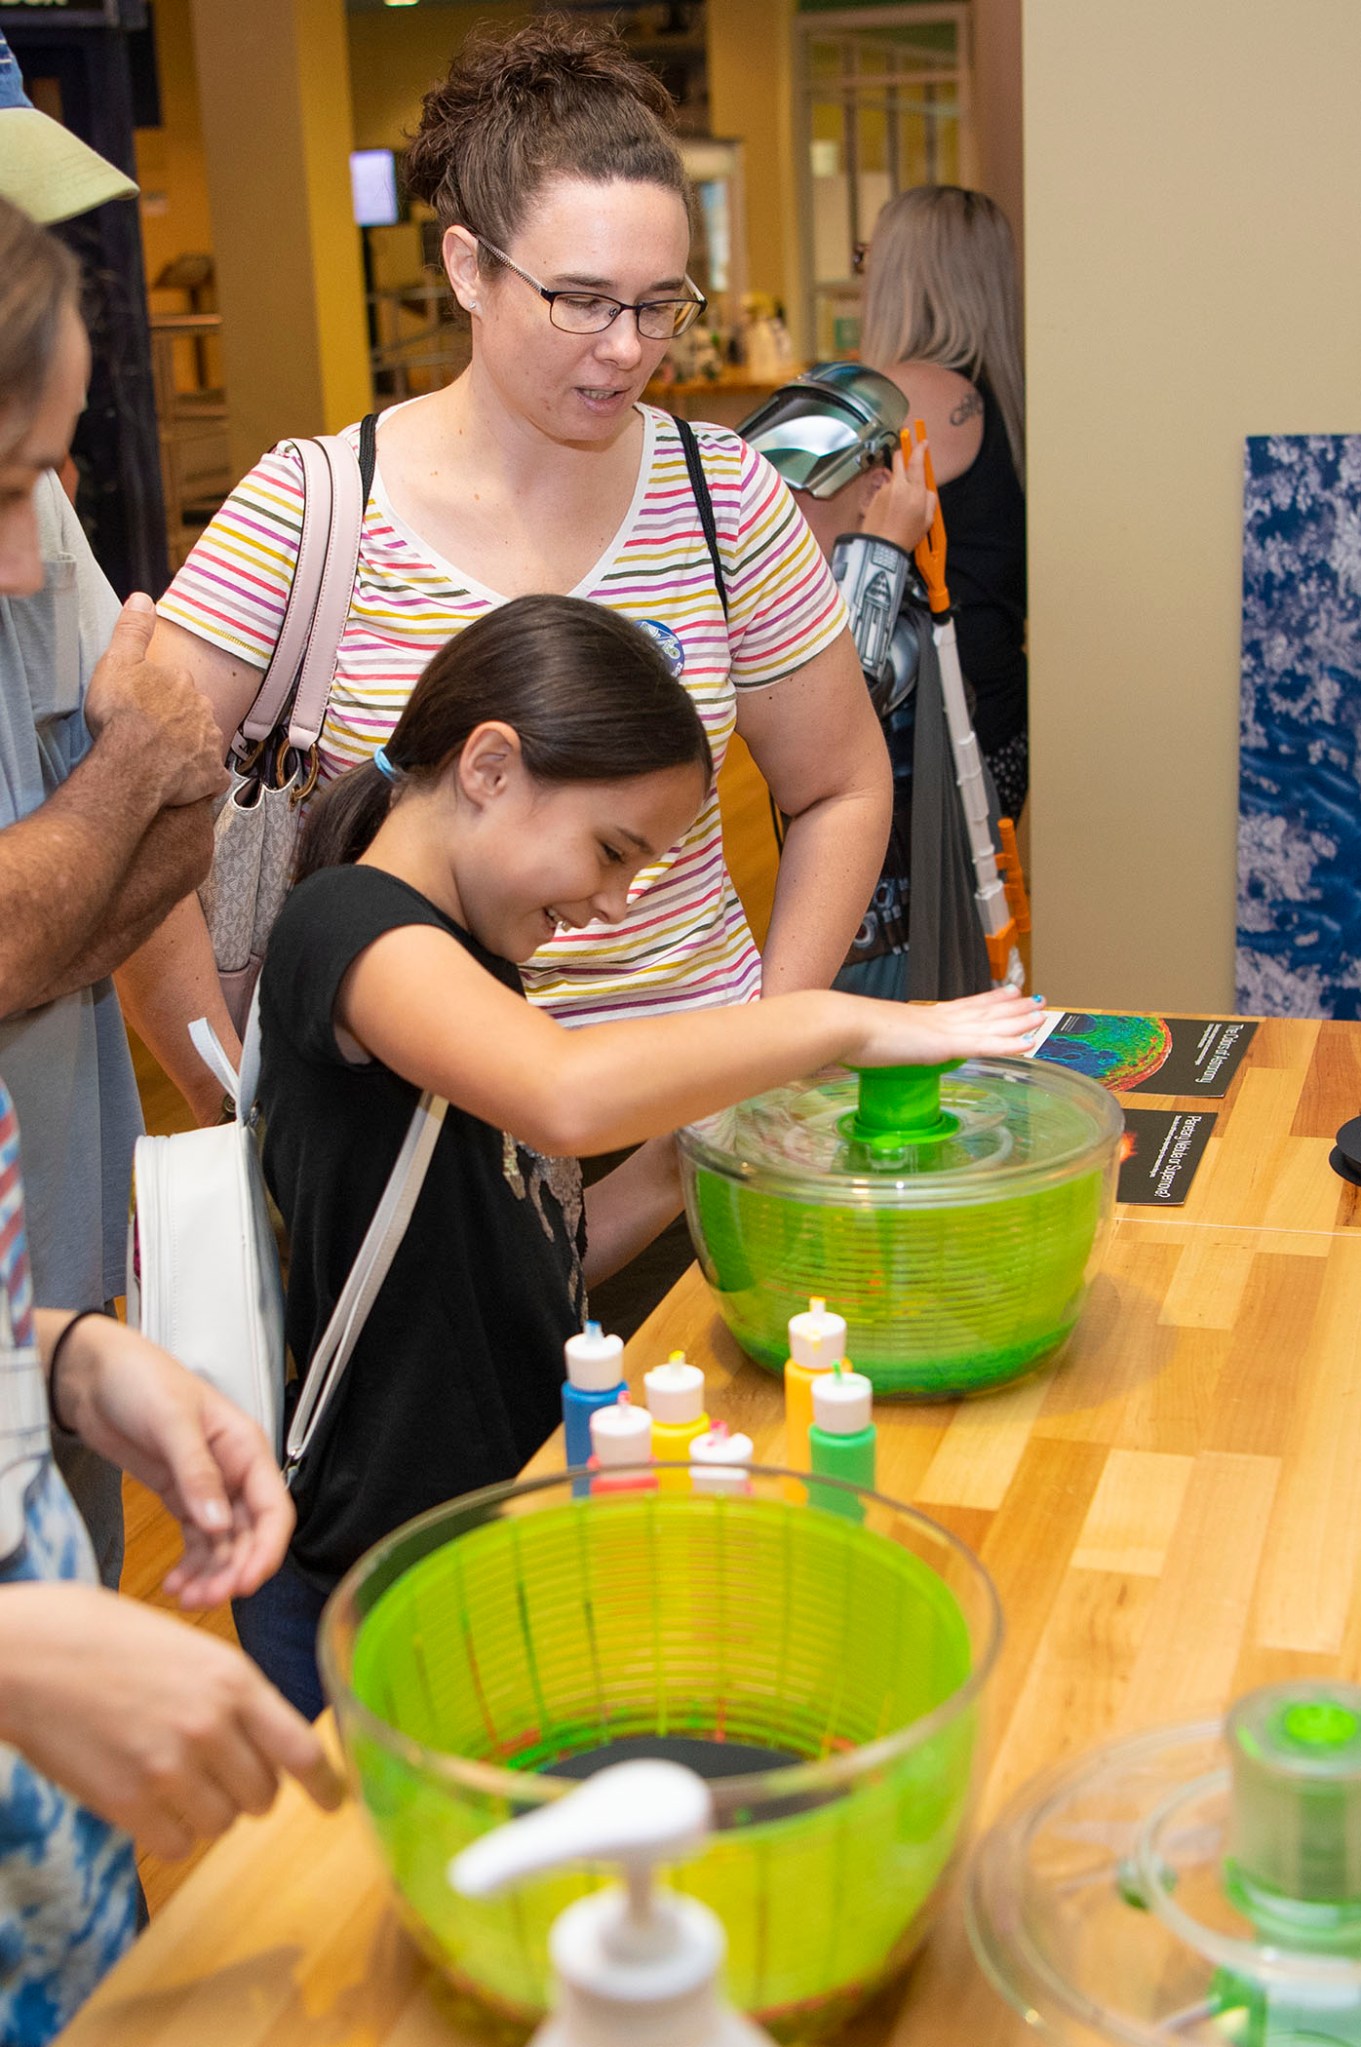 A young girl, watched by her mother, participates in the tie-dye booth at the INFINITY Science Center